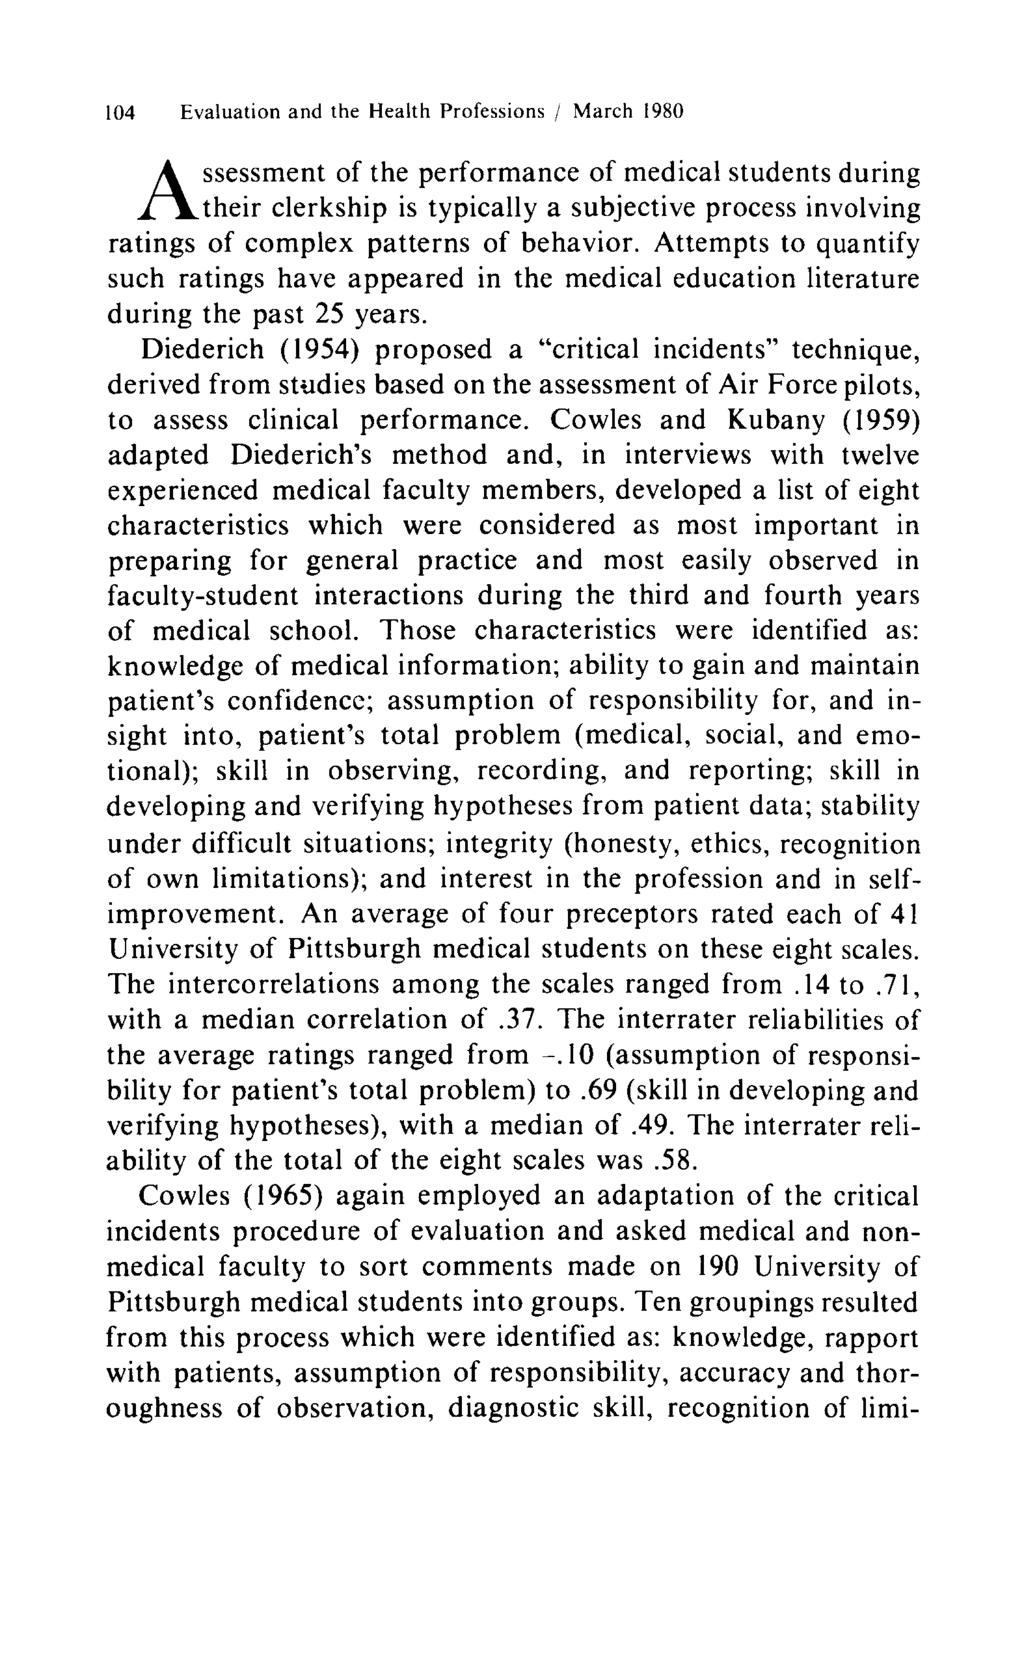 104 Evaluation and the Health Professions / March 1980 Assessment of the performance of medical students during their clerkship is typically a subjective process involving ratings of complex patterns